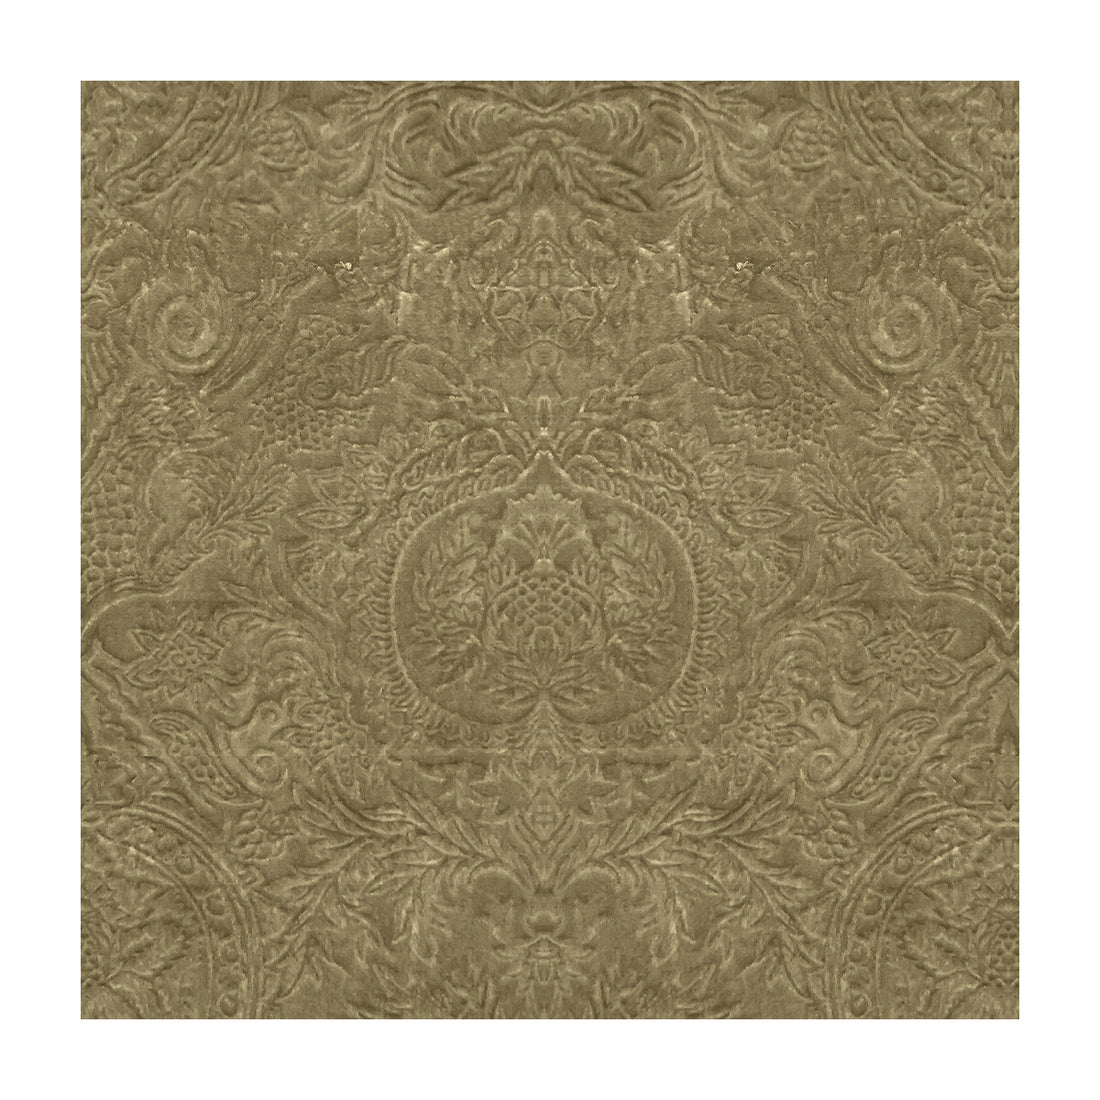 Chic Elegance fabric in bronze color - pattern 34004.616.0 - by Kravet Couture in the Modern Luxe II collection